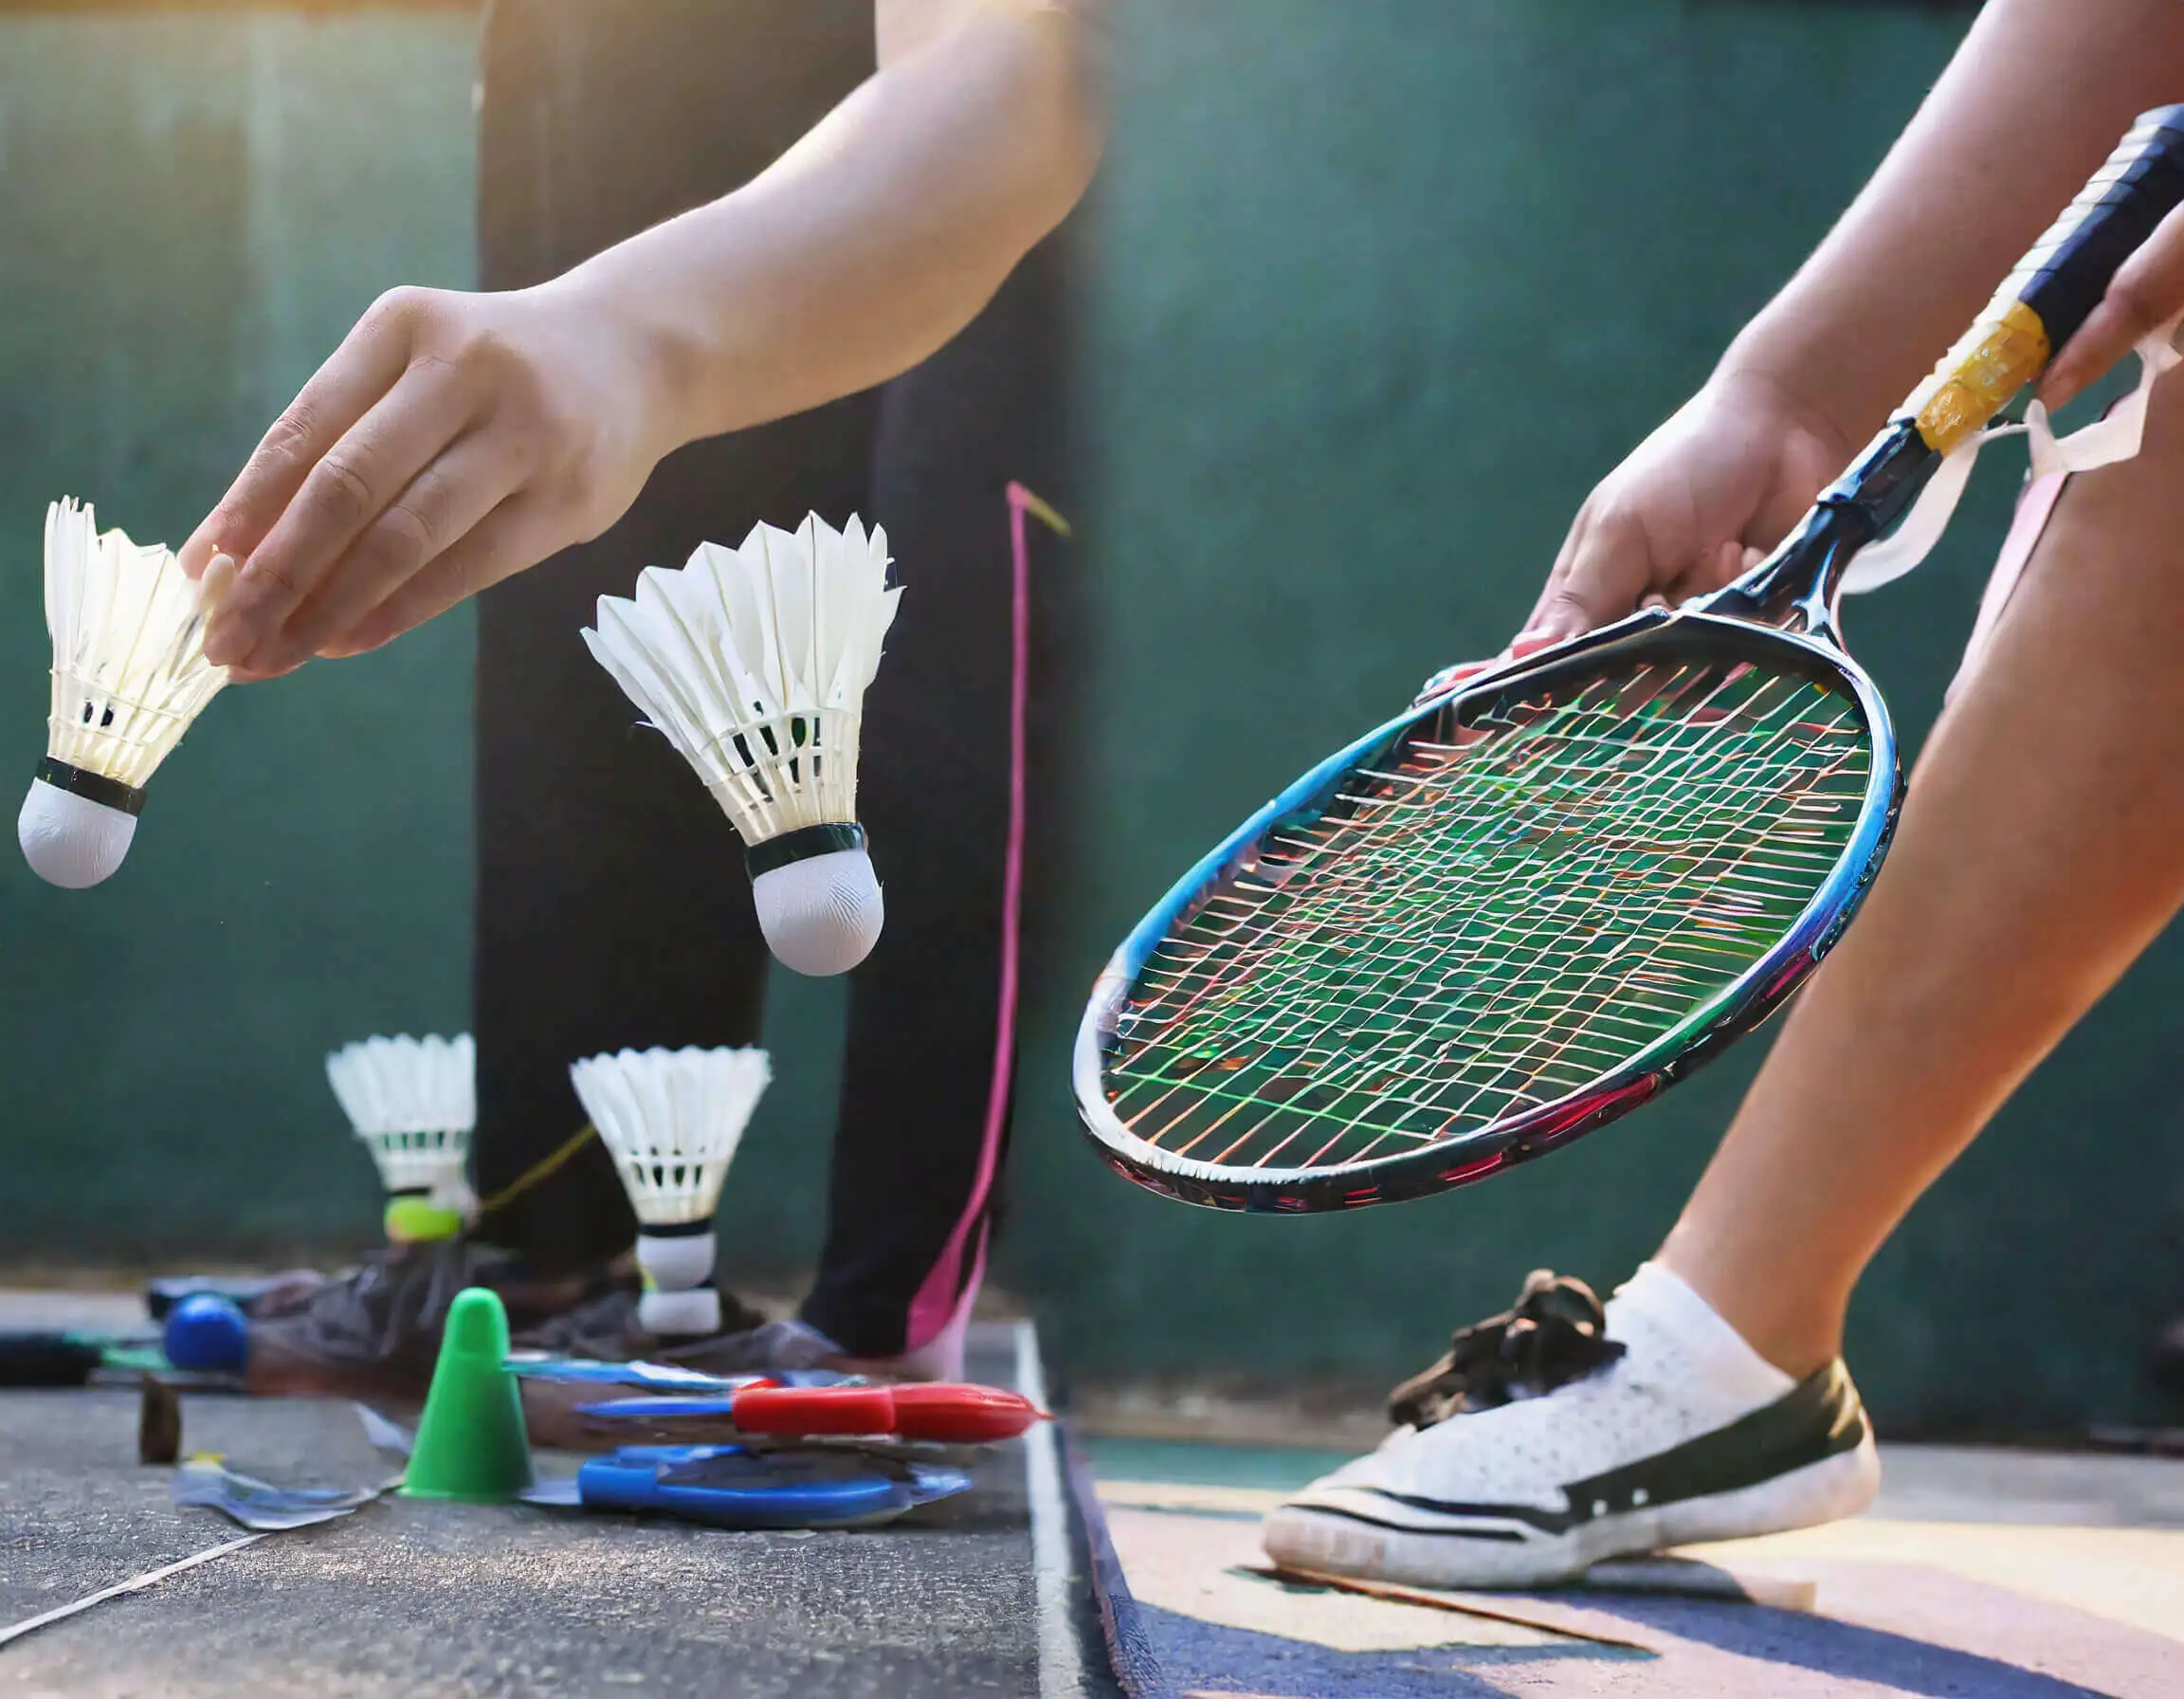 Master Badminton'S Forehand And Backhand Strokes With Our Comprehensive Guide. Improve Your Skills For Success On The Court.